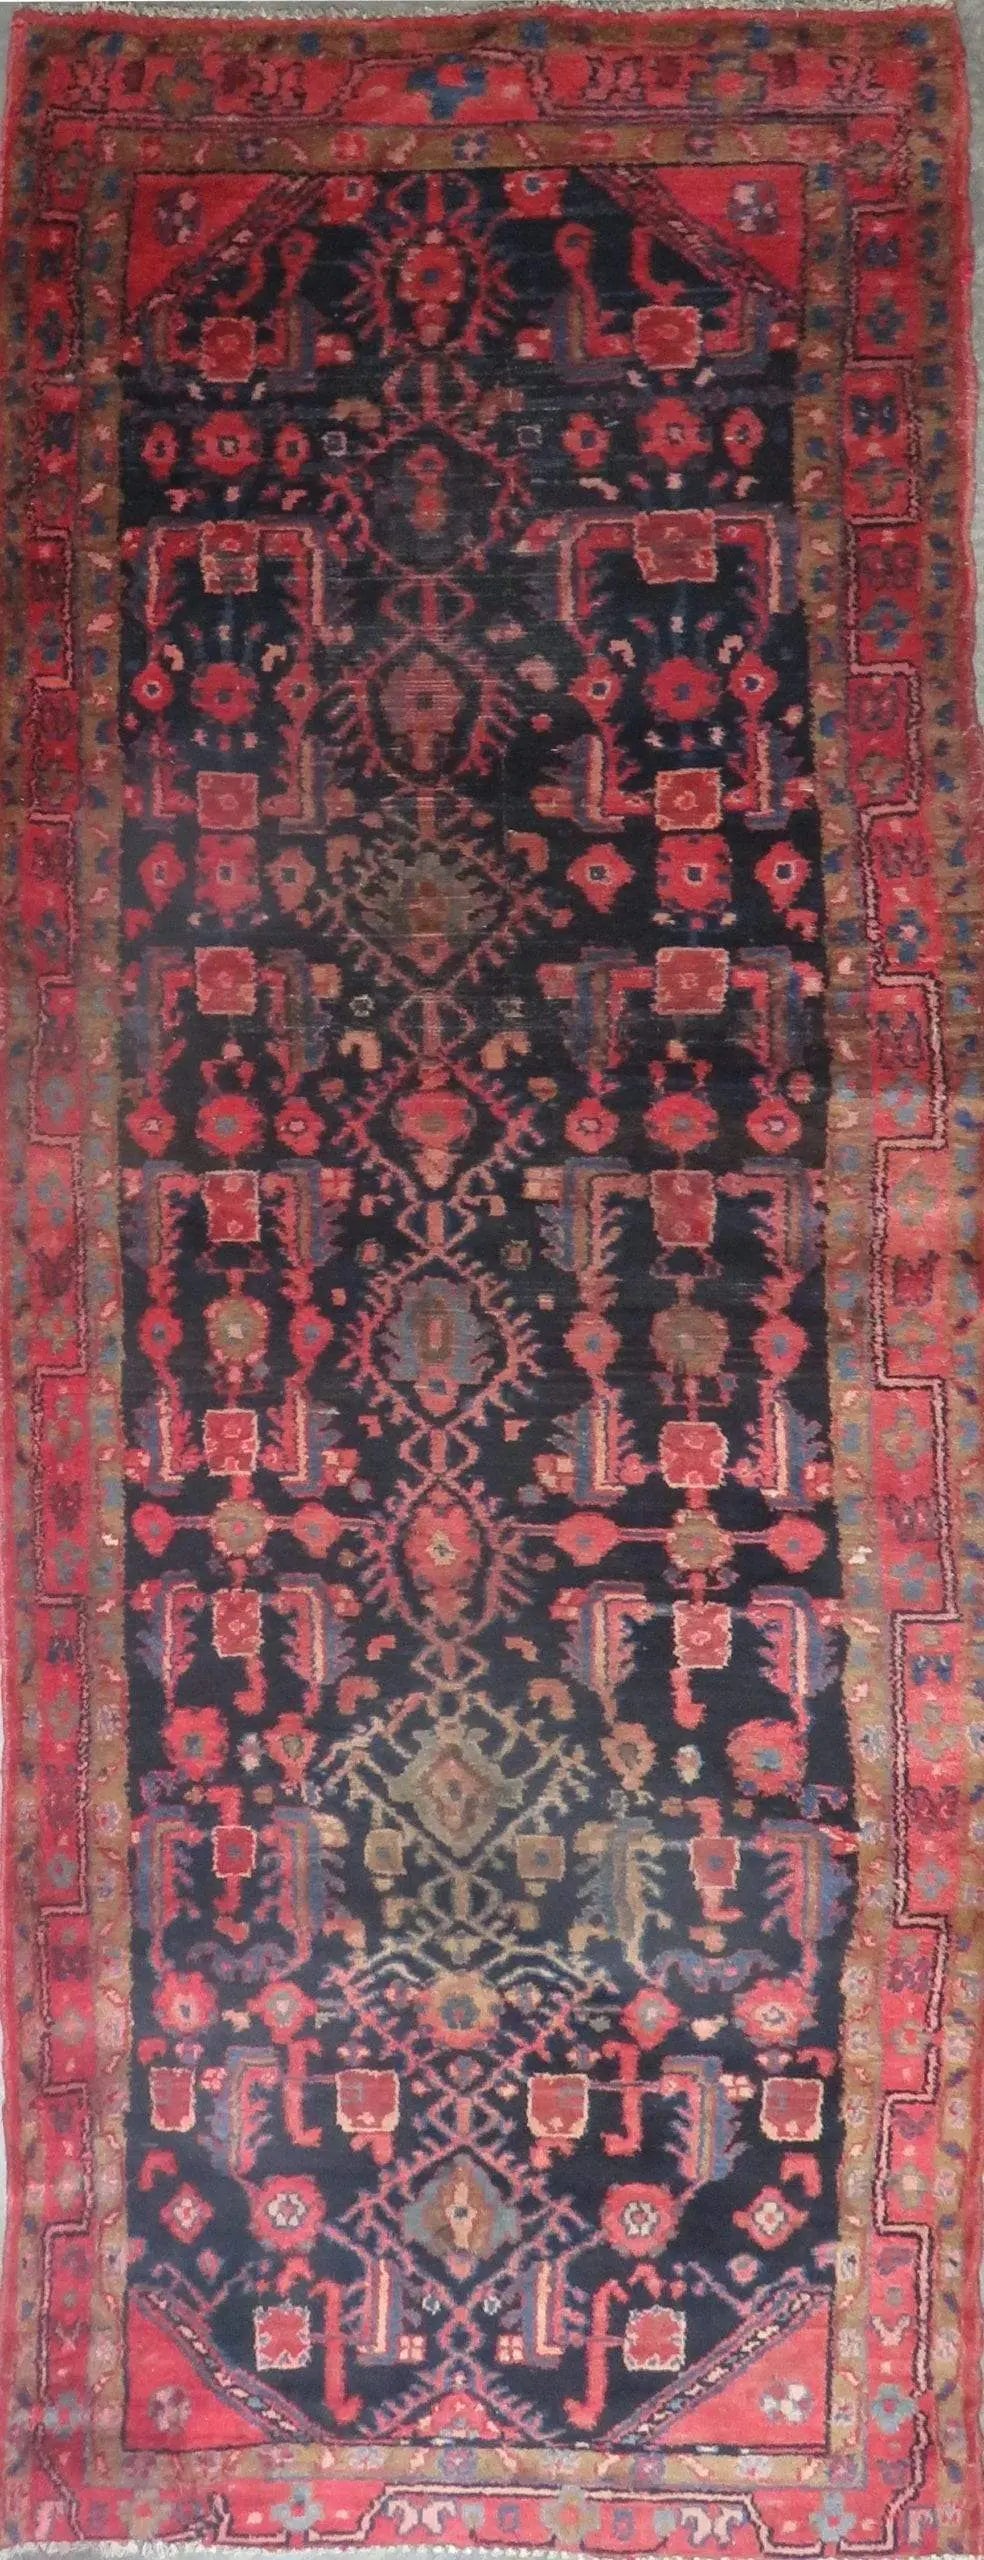 Hand-Knotted Vintage Rug 10'10" x 3'3"